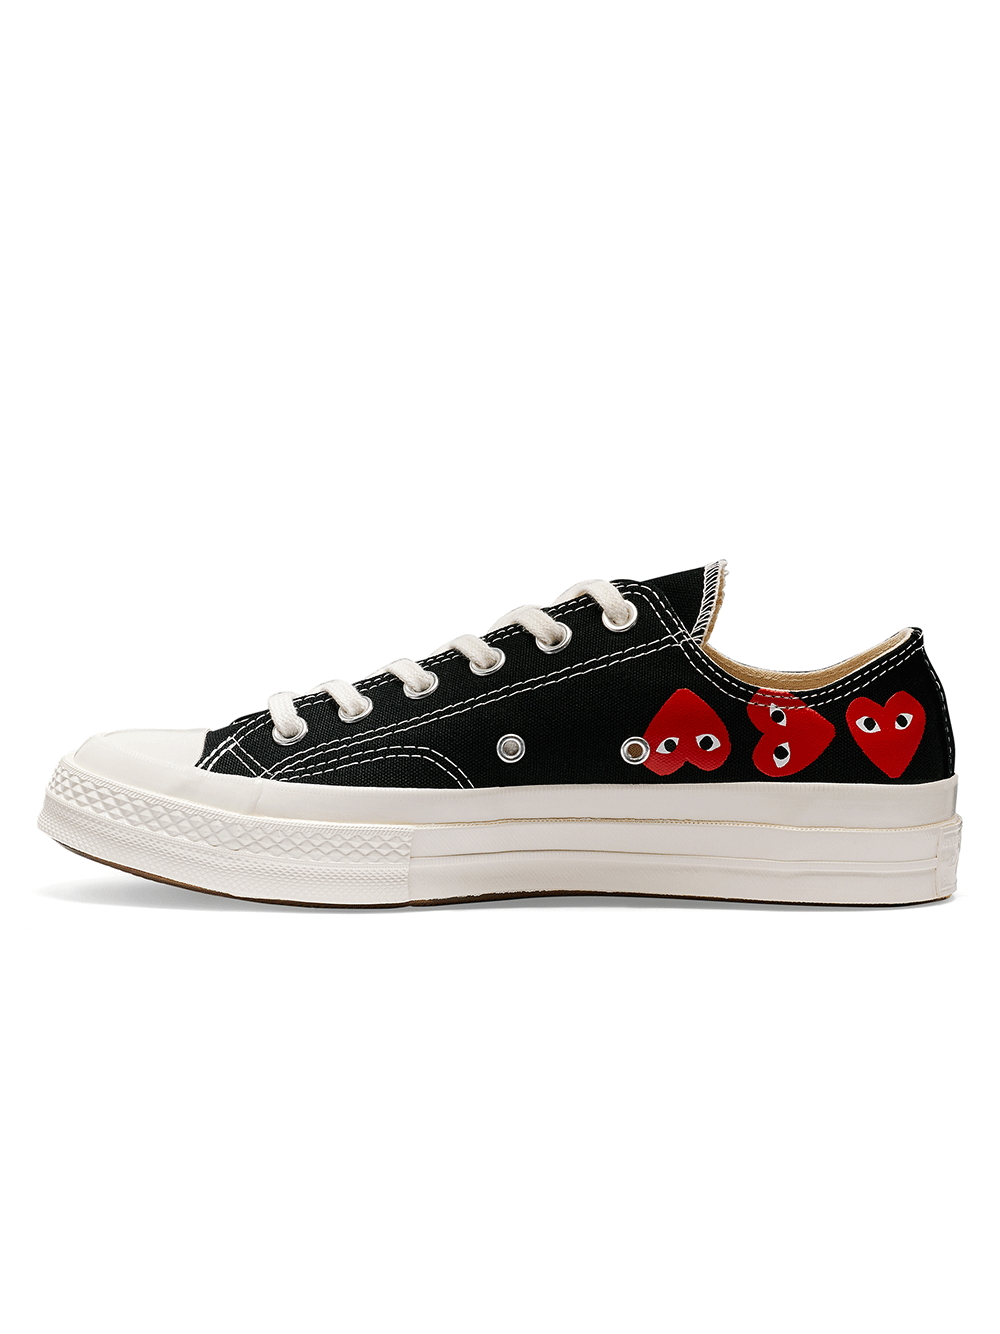 COMME-des-GARCONS-PLAY-CONVERSE-MULTI-HEART-Chuck-Taylor-All-Star-_70-Low-Sneakers-2